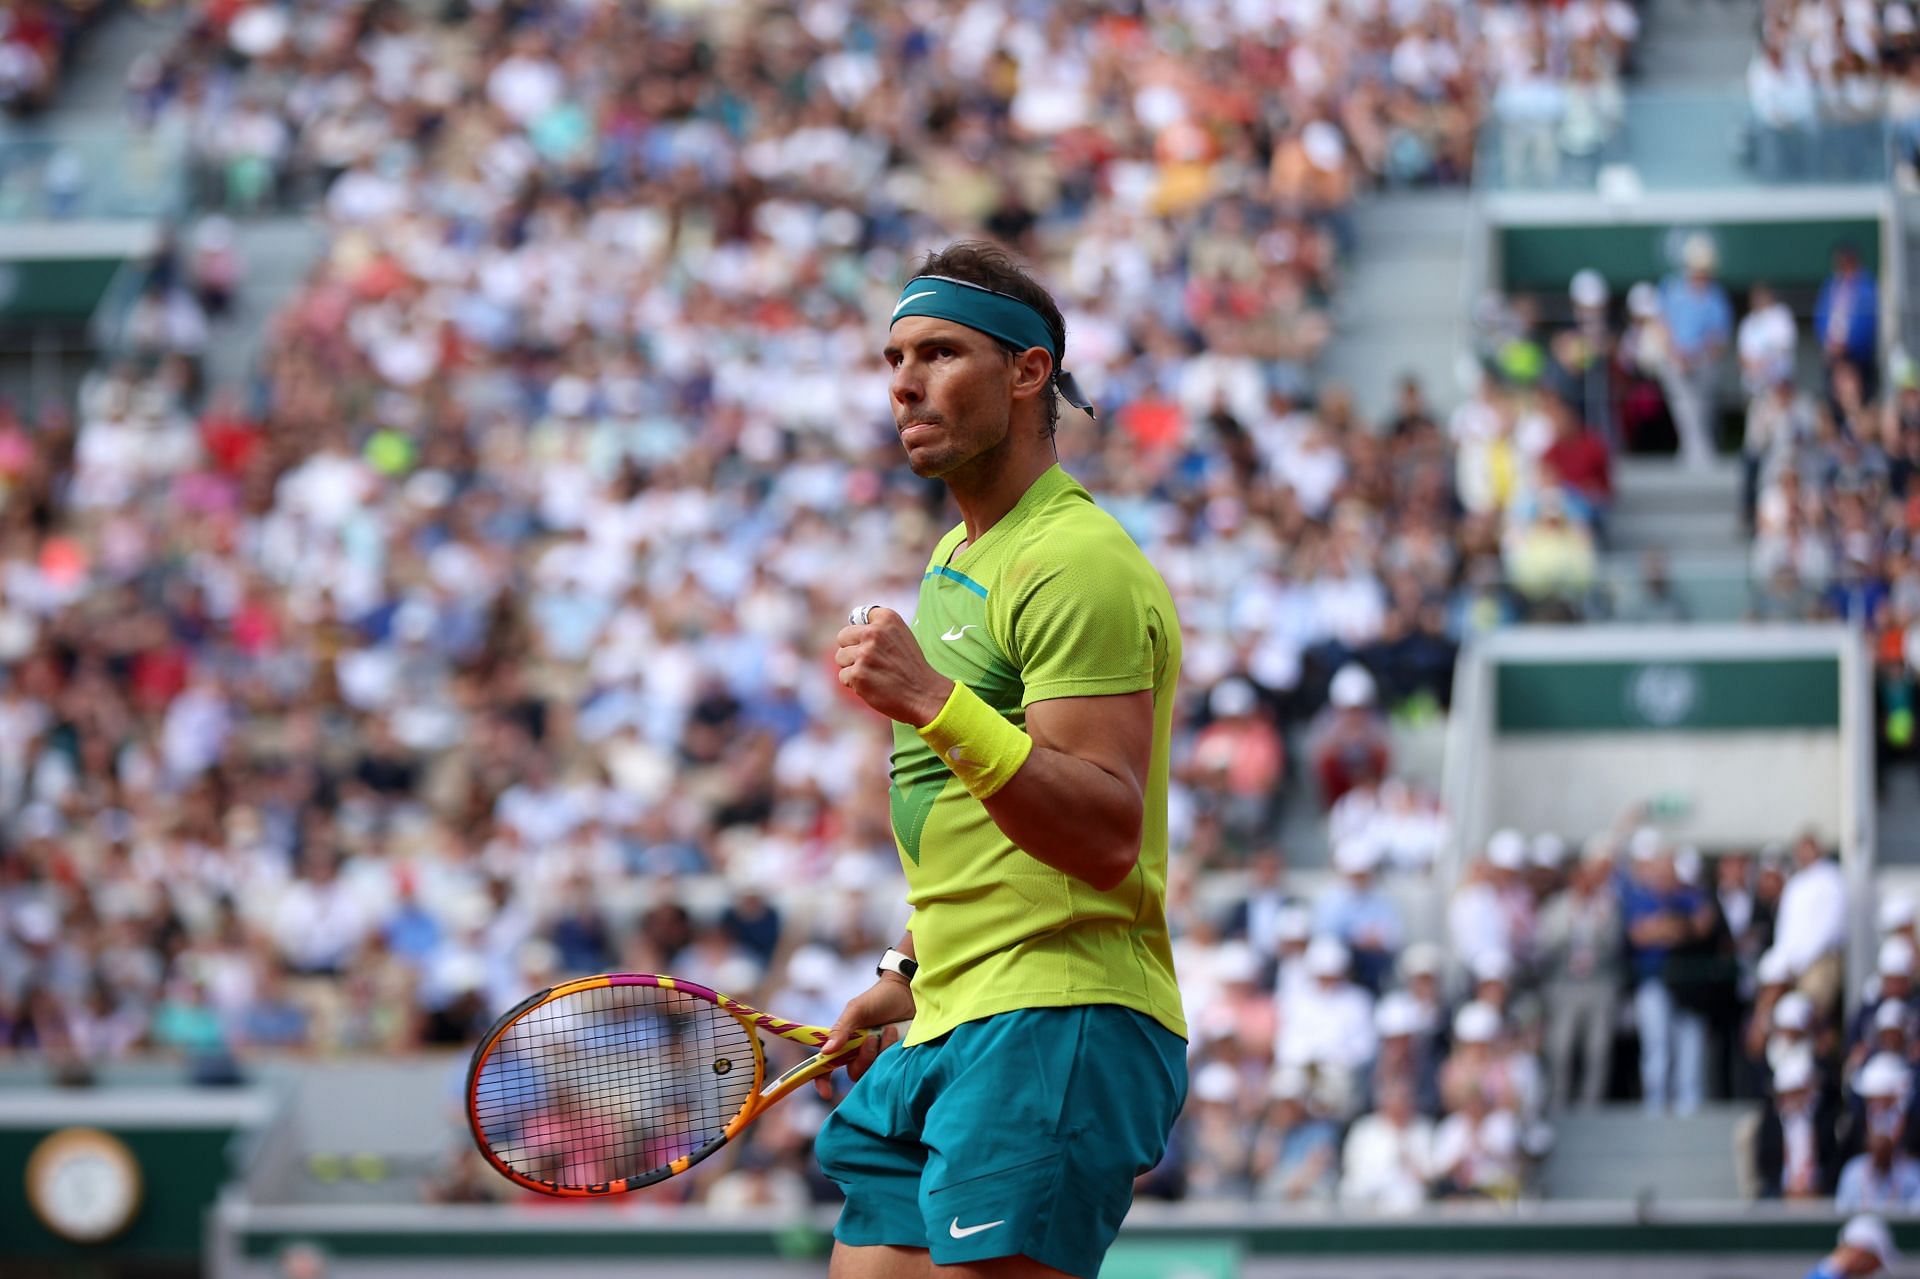 Rafael Nadal takes on Felix Auger-Aliassime in the fourth round of the French Open